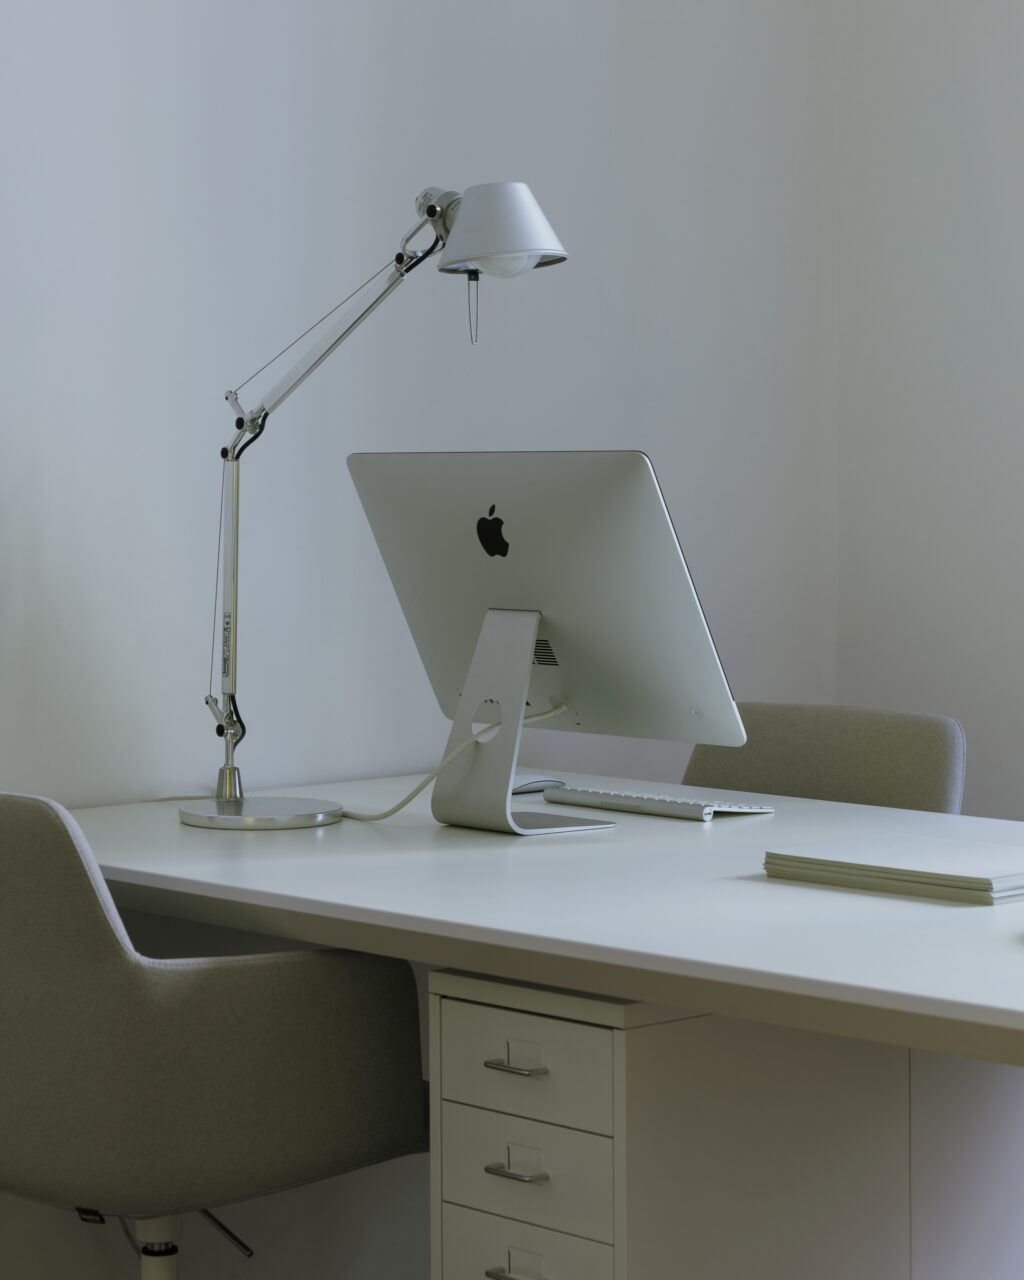 A work table in a white room and work lamp